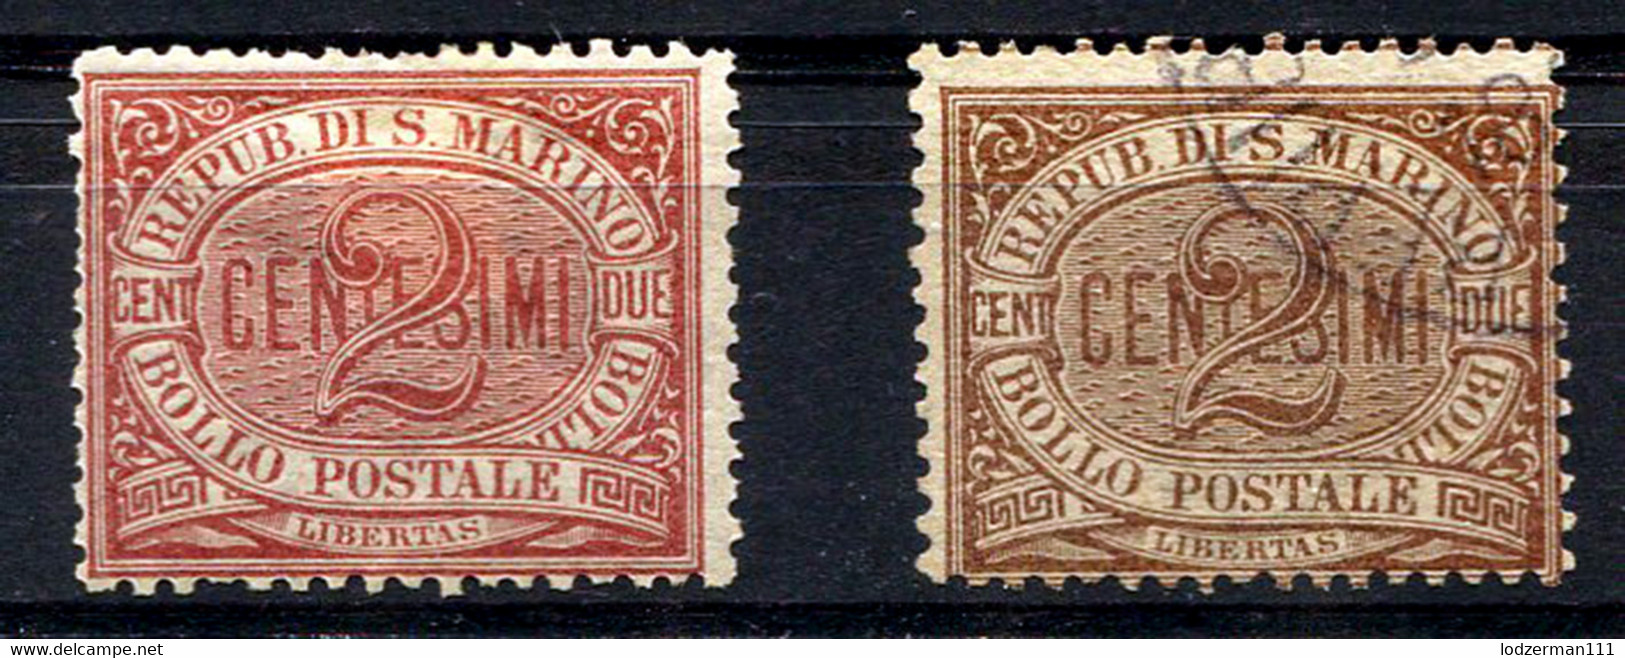 SAN MARINO 1894 - Yv.26 (Mi.26, Sc.3) Strongly Distinct Shades (MH-used) VF - Used Stamps